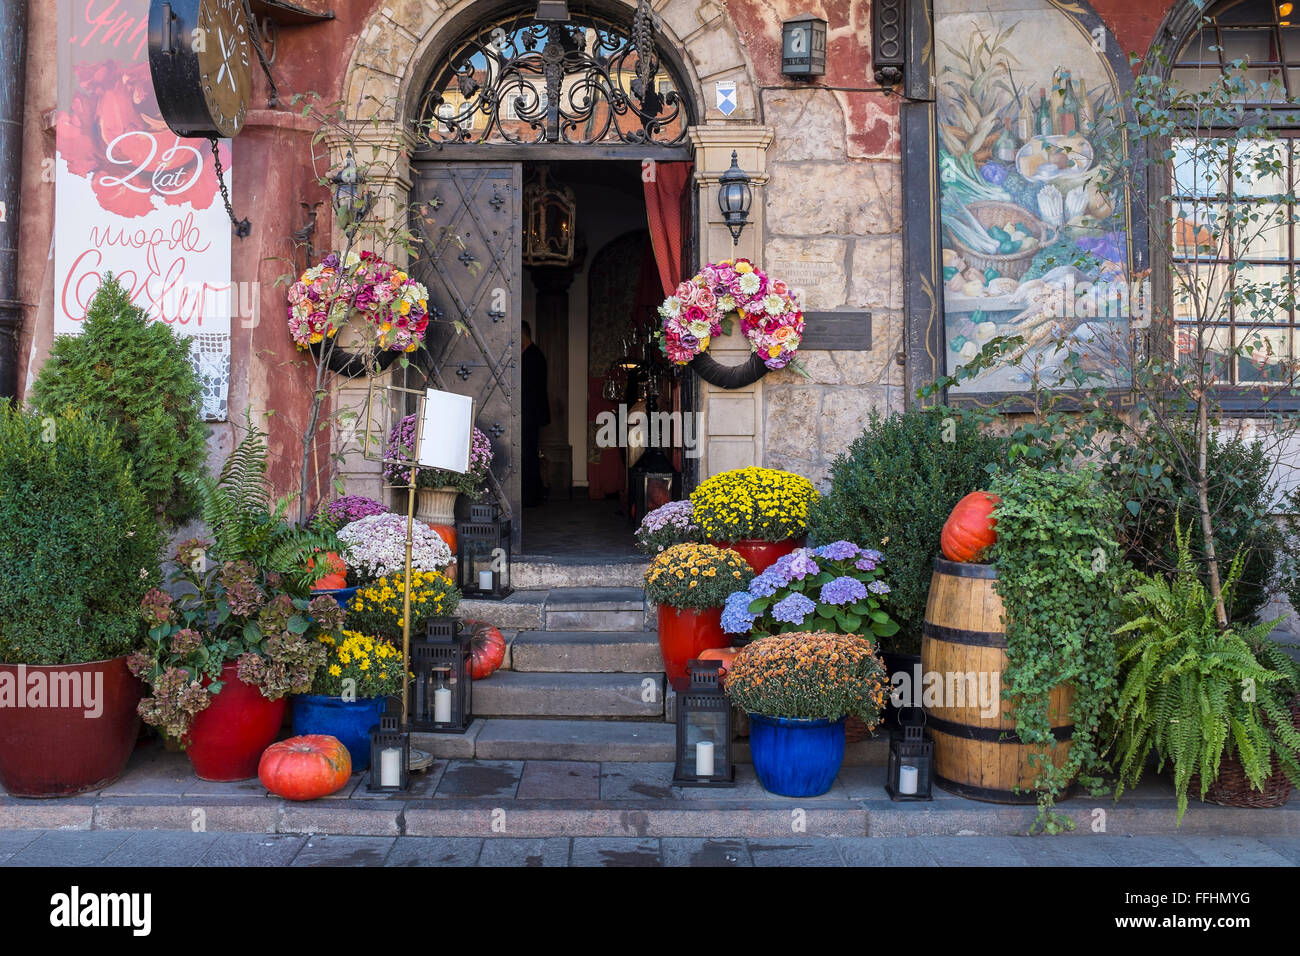 colourful entrance to a restaurant in the Old town market place, Warsaw, Poland Stock Photo